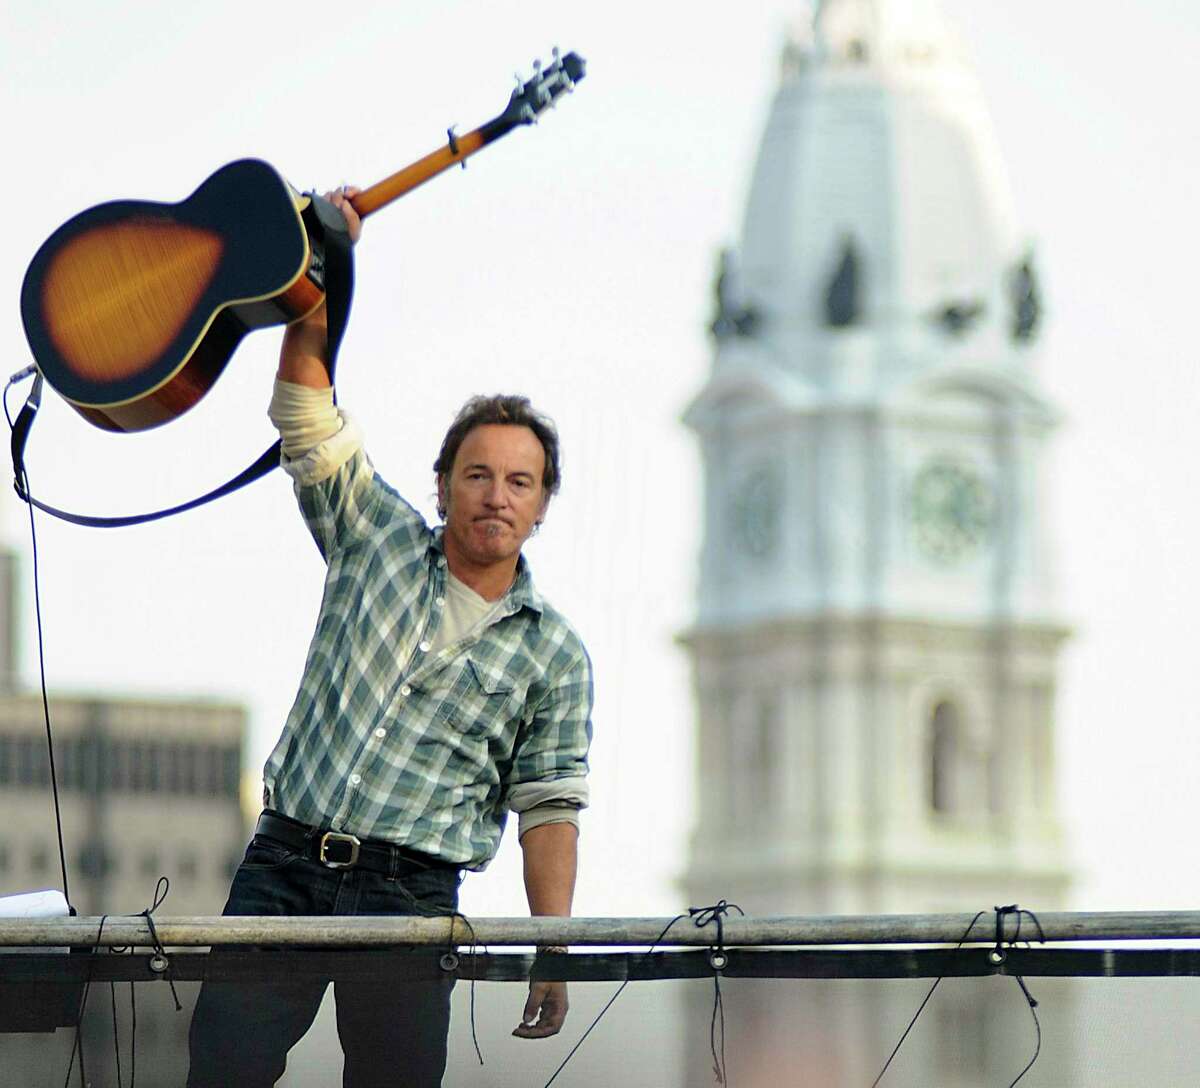 'Springsteen on the Parkway' is one of the many photographs of 'The Boss' that is on display at the C. Parker Gallery in Greenwich. The show called “Growin’ Up — Bruce Springsteen at 70" will run through Sunday.